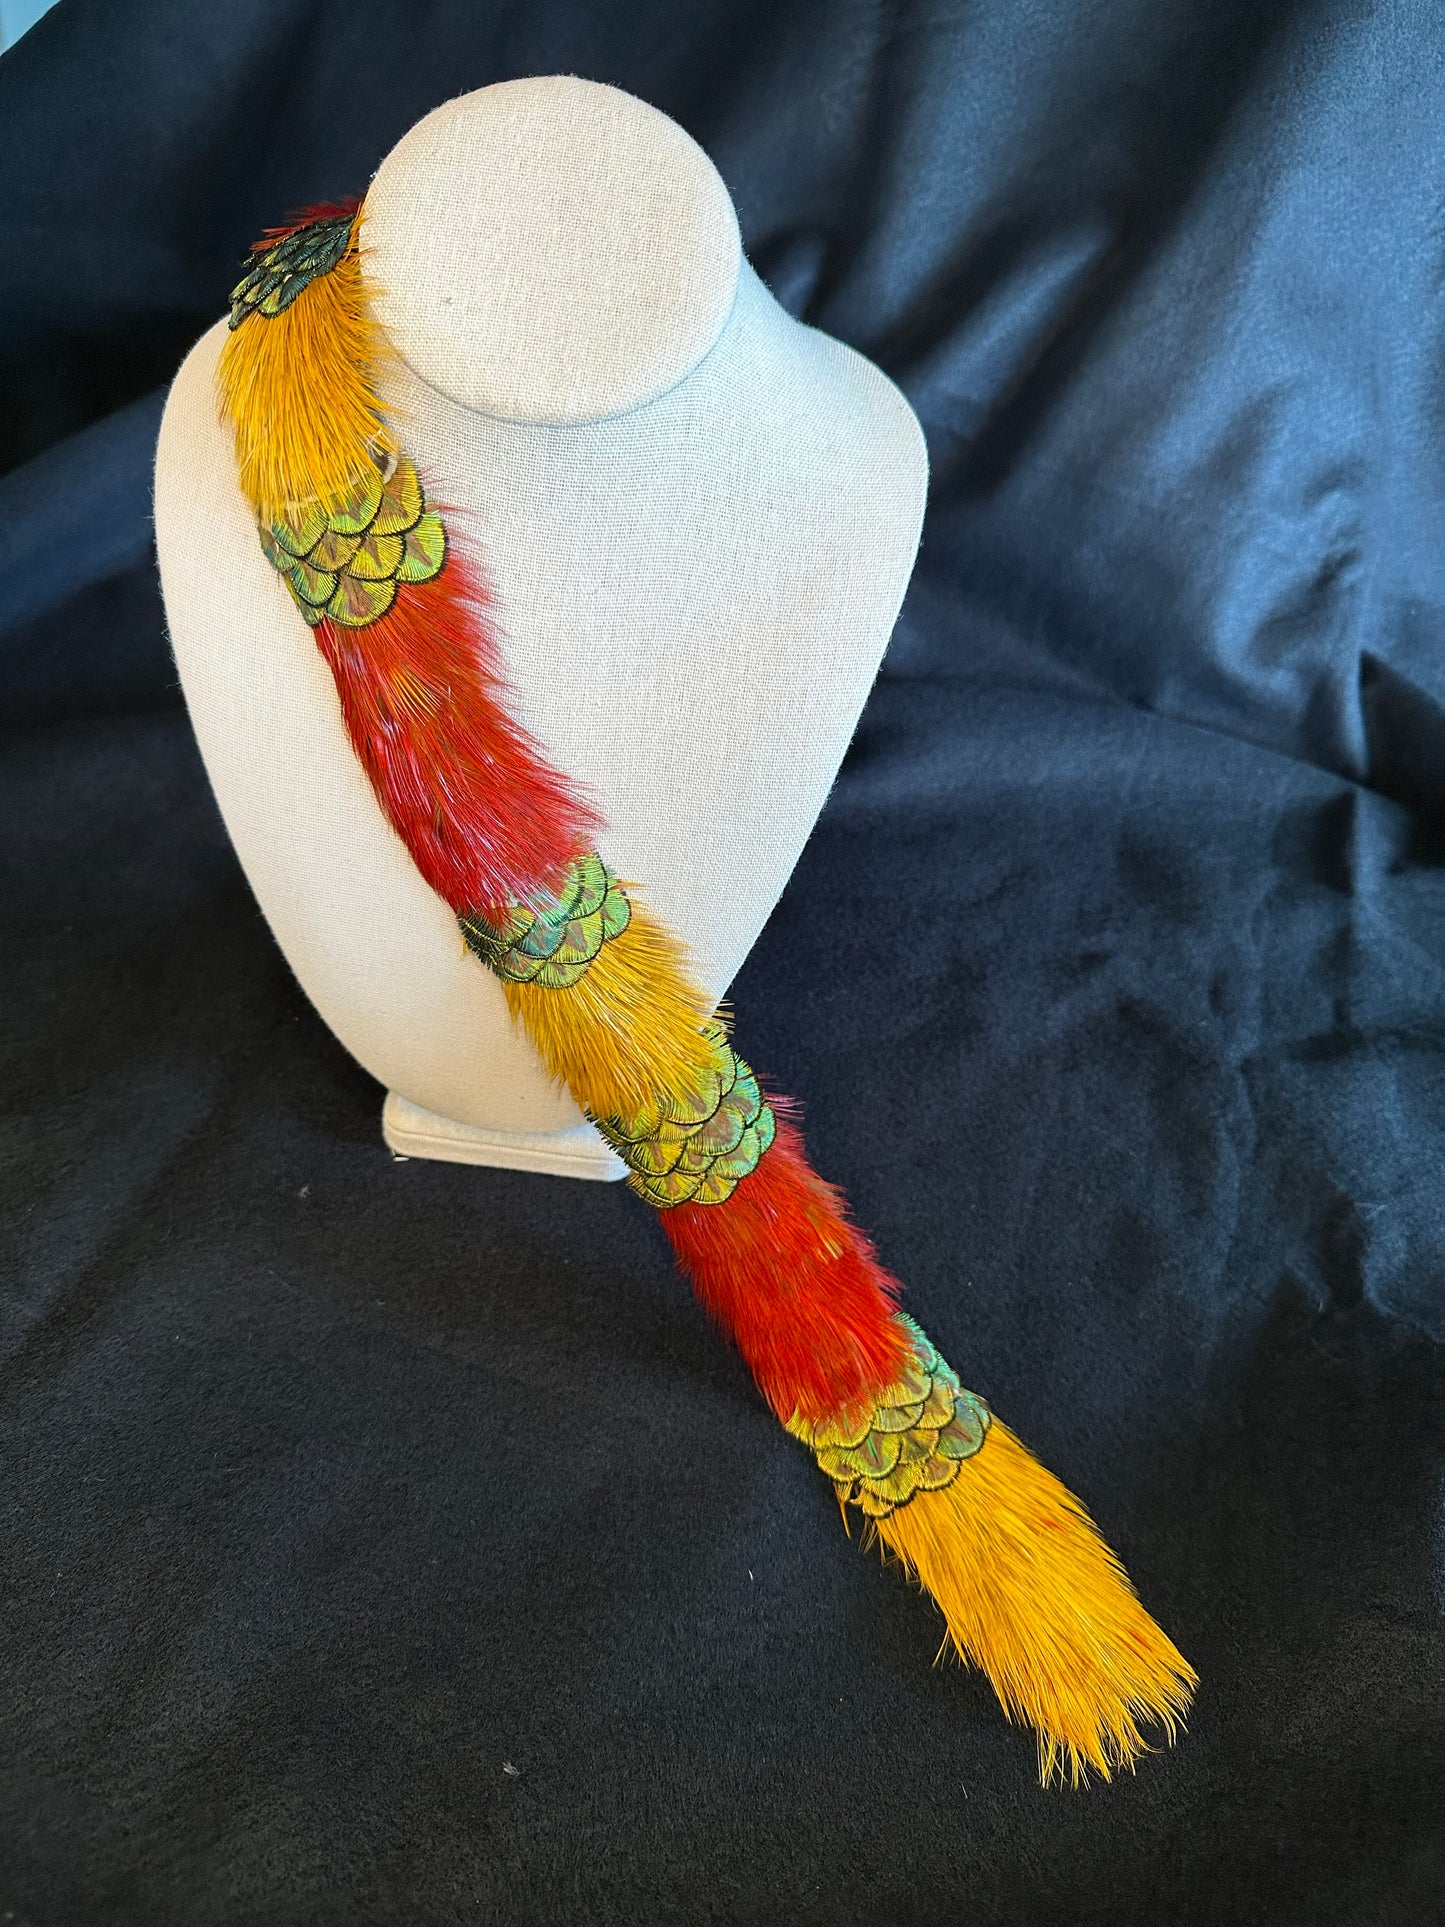 Golden Pheasant w/ gold peacock accents humu papale (feather hat band)